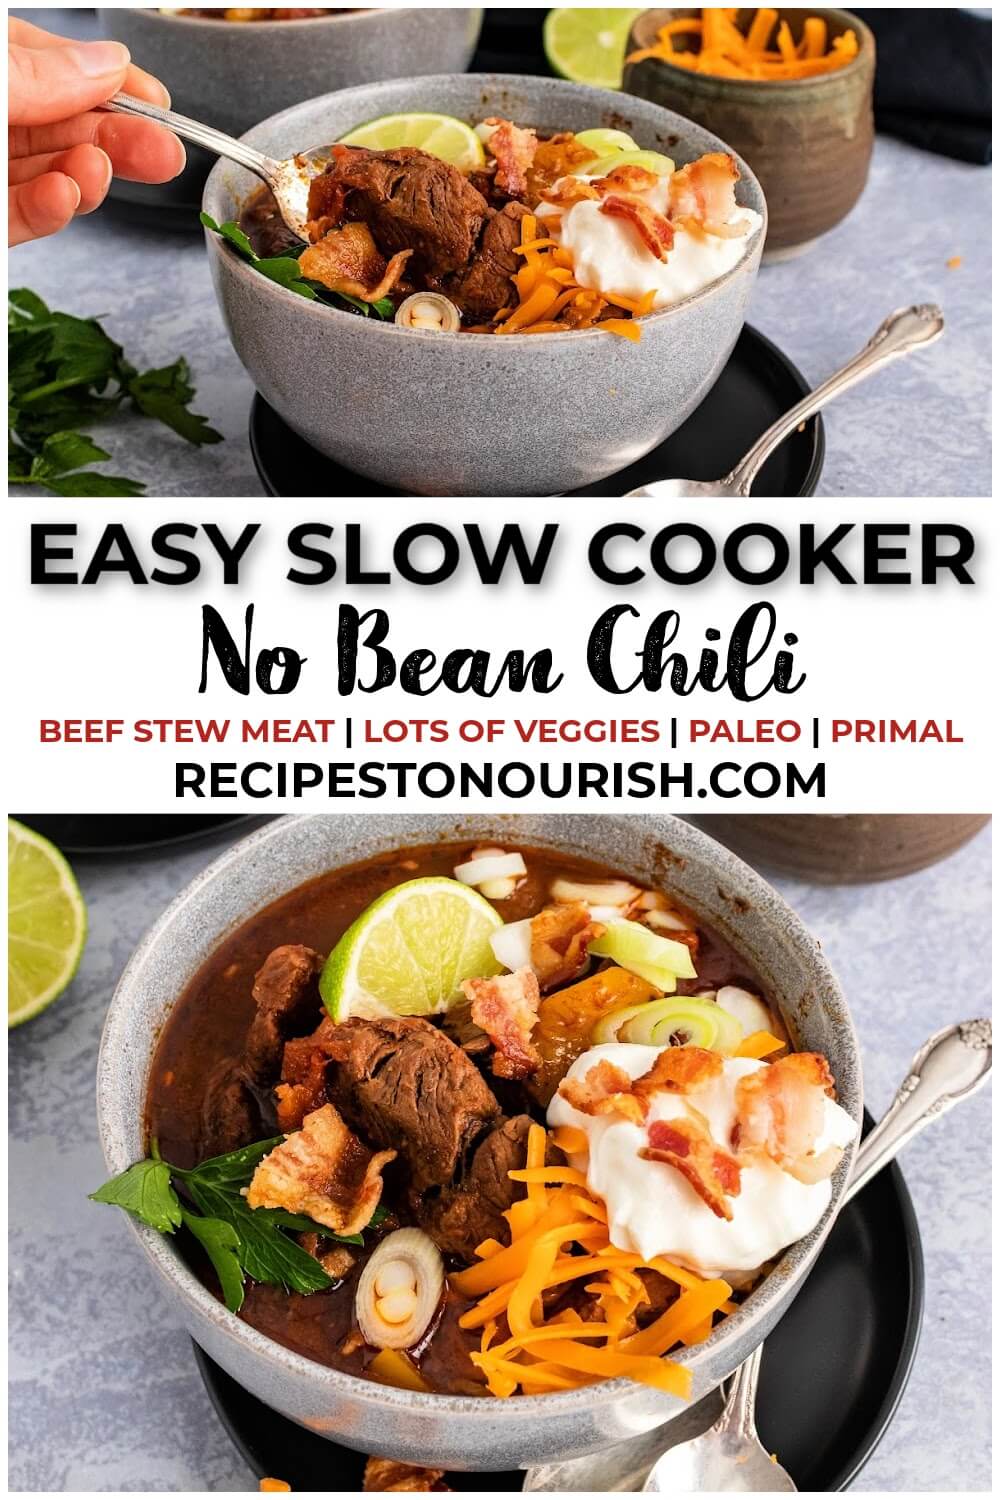 Two photos of bowls of chili with large chunks of stew meat, topped with shredded cheddar cheese, sour cream, bacon pieces, green onions, fresh cilantro and a lime wedge, sitting on plates with a spoon next to it with text that says Easy Slow Cooker No Bean Chili, beef stew meat, lots of veggies, paleo, primal, RECIPESTONOURISH.com